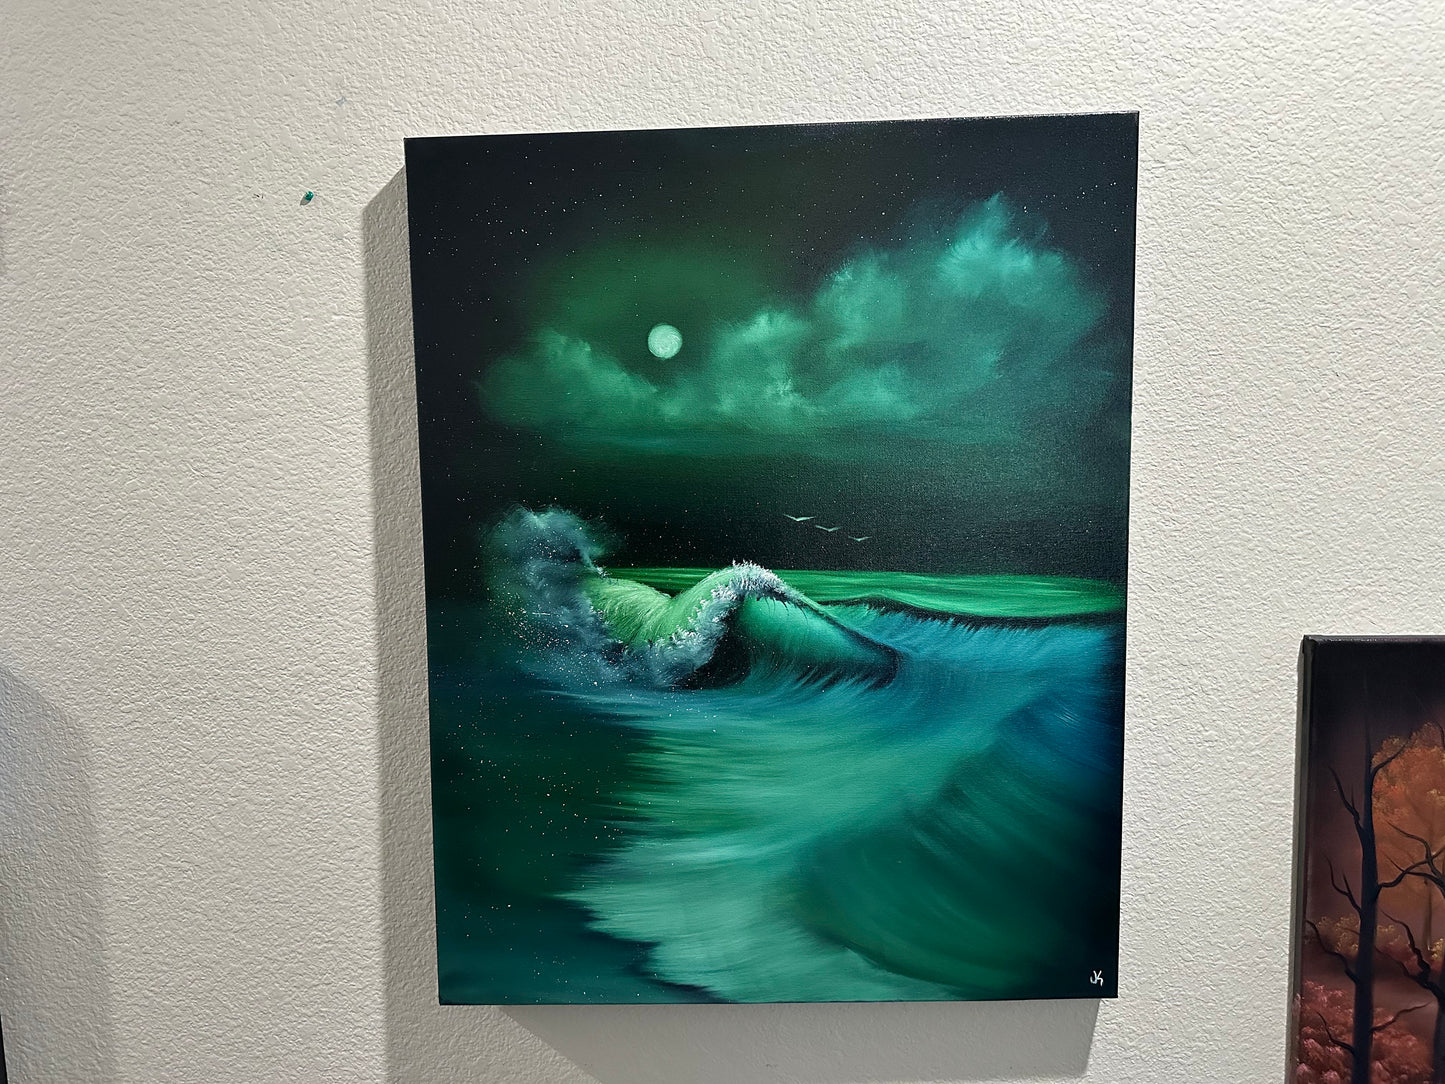 Painting 800 - 24x30" Pro Series Canvas - Night Seascape Beach painted Live on TikTok on 6-2-23 by PaintWithJosh